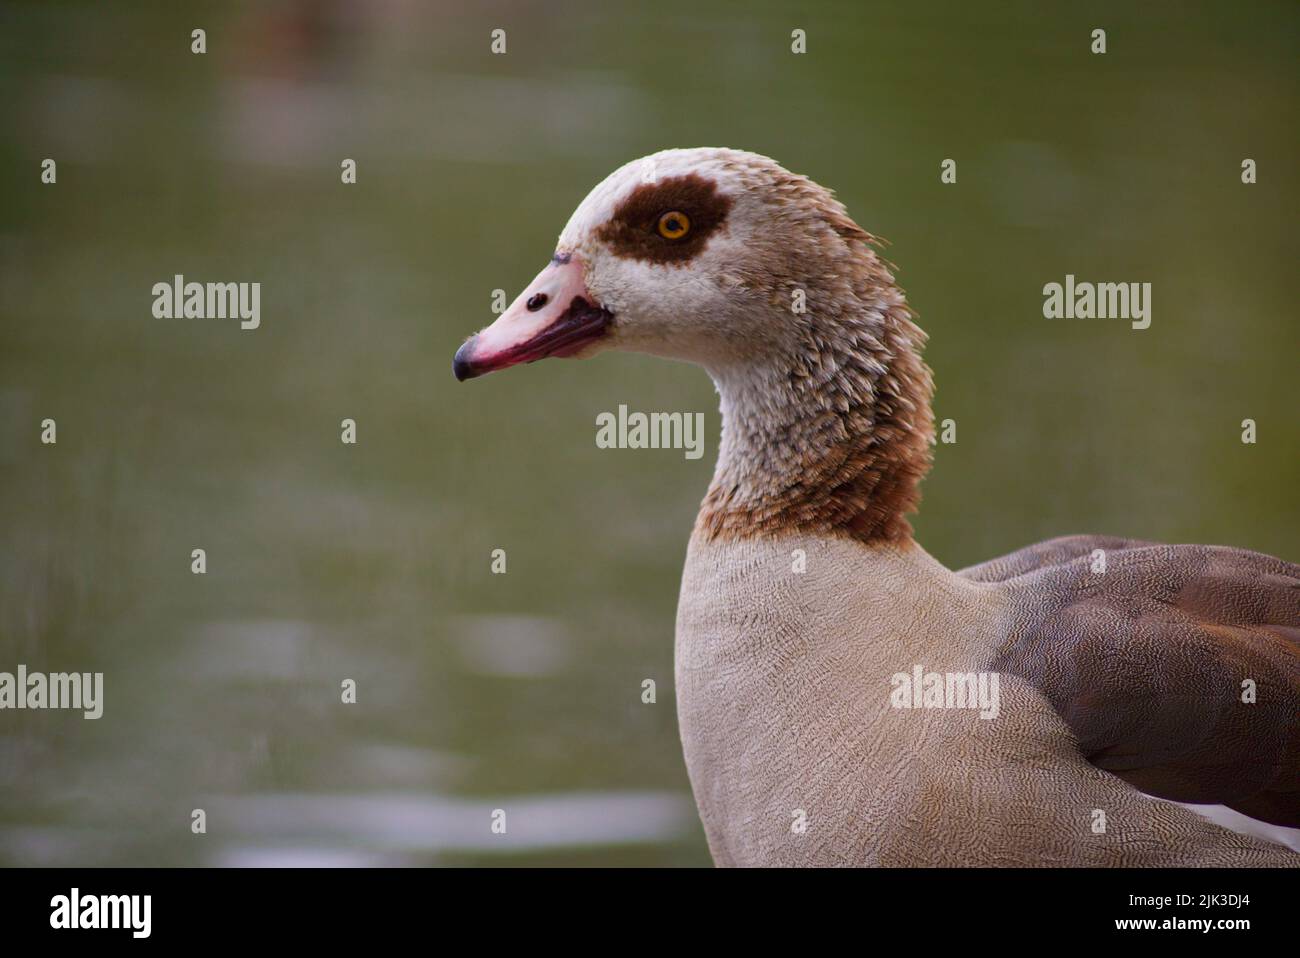 The Egyptian goose, a member of the duck, goose, and swan family Anatidae (Alopochen aegyptiaca), seen here at the Attenborough Nature Centre, UK. Stock Photo